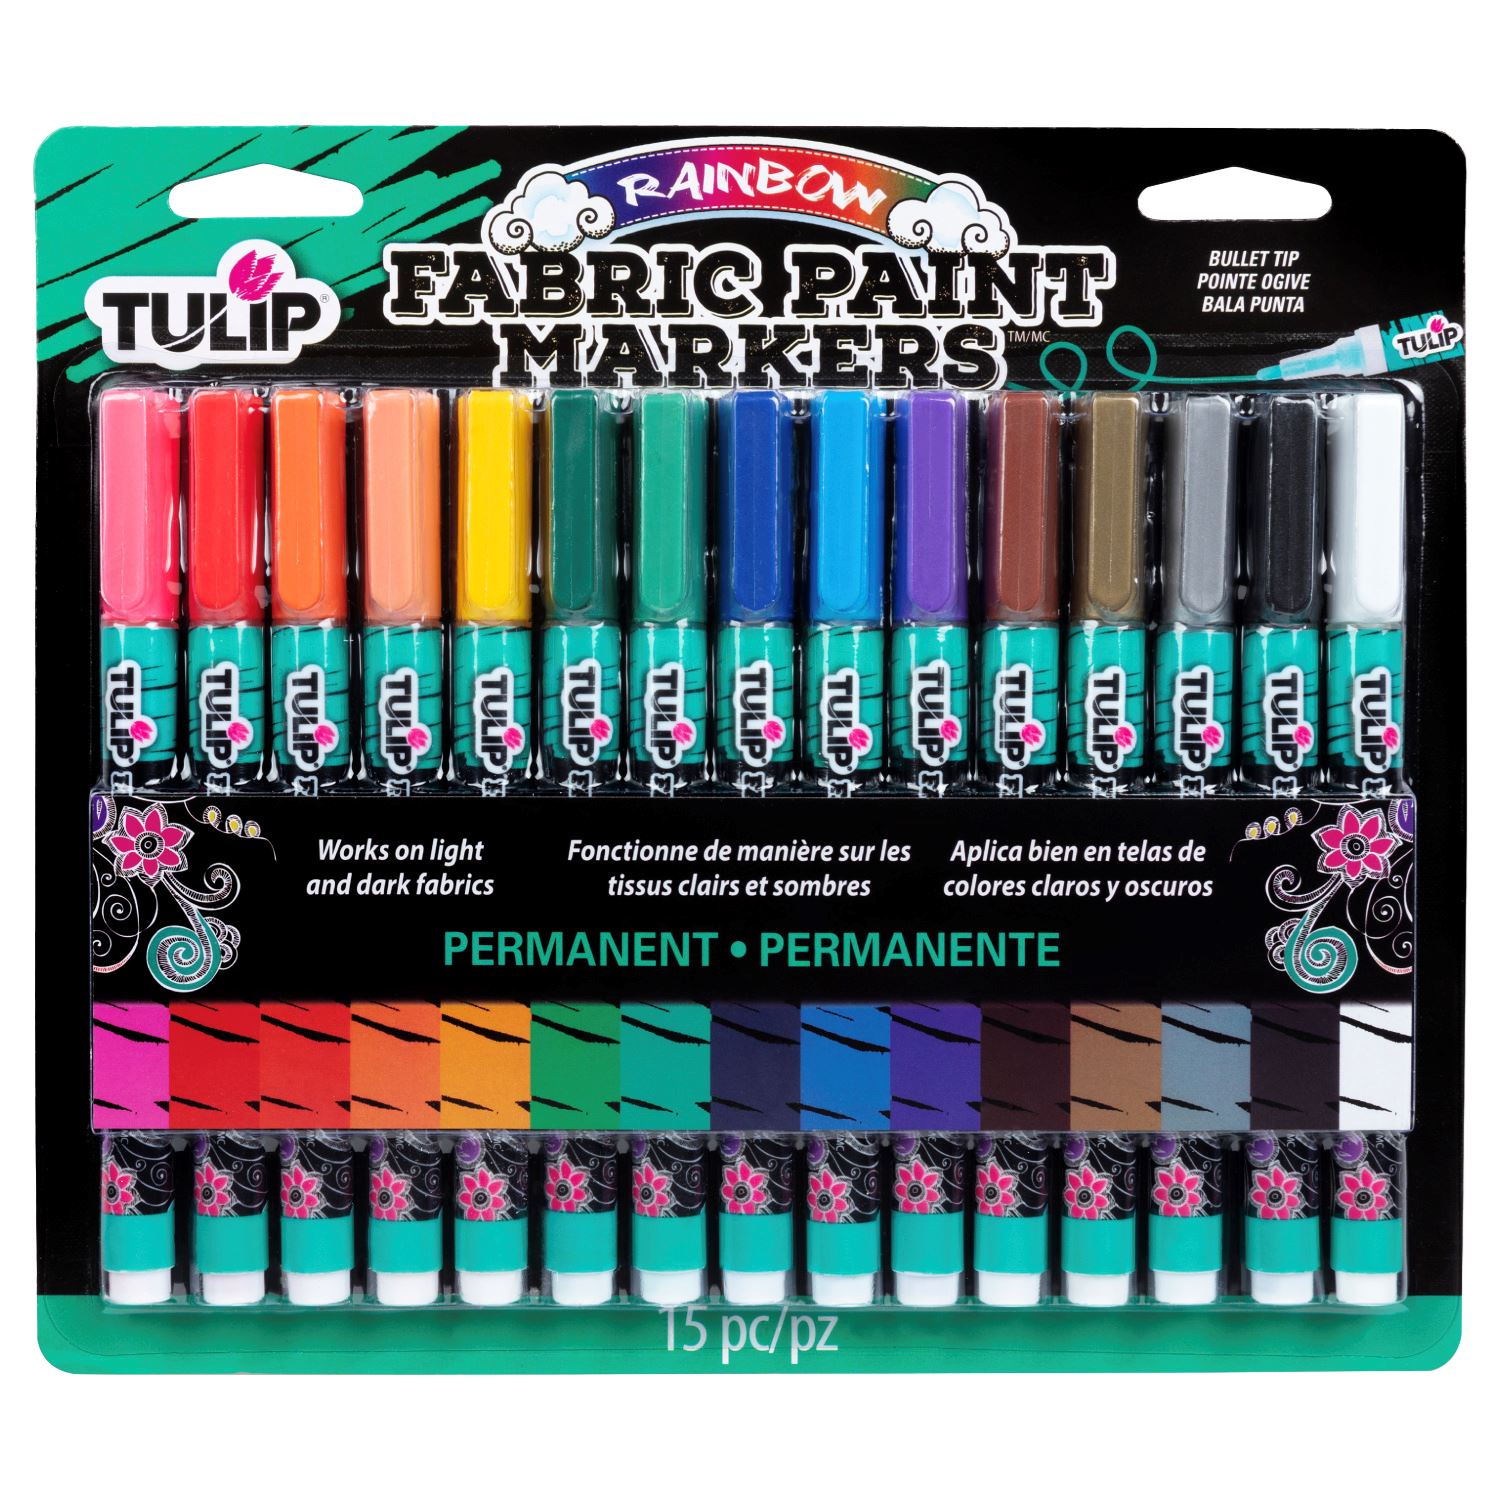 iHeartArt 12 Fabric Markers – brightstripes